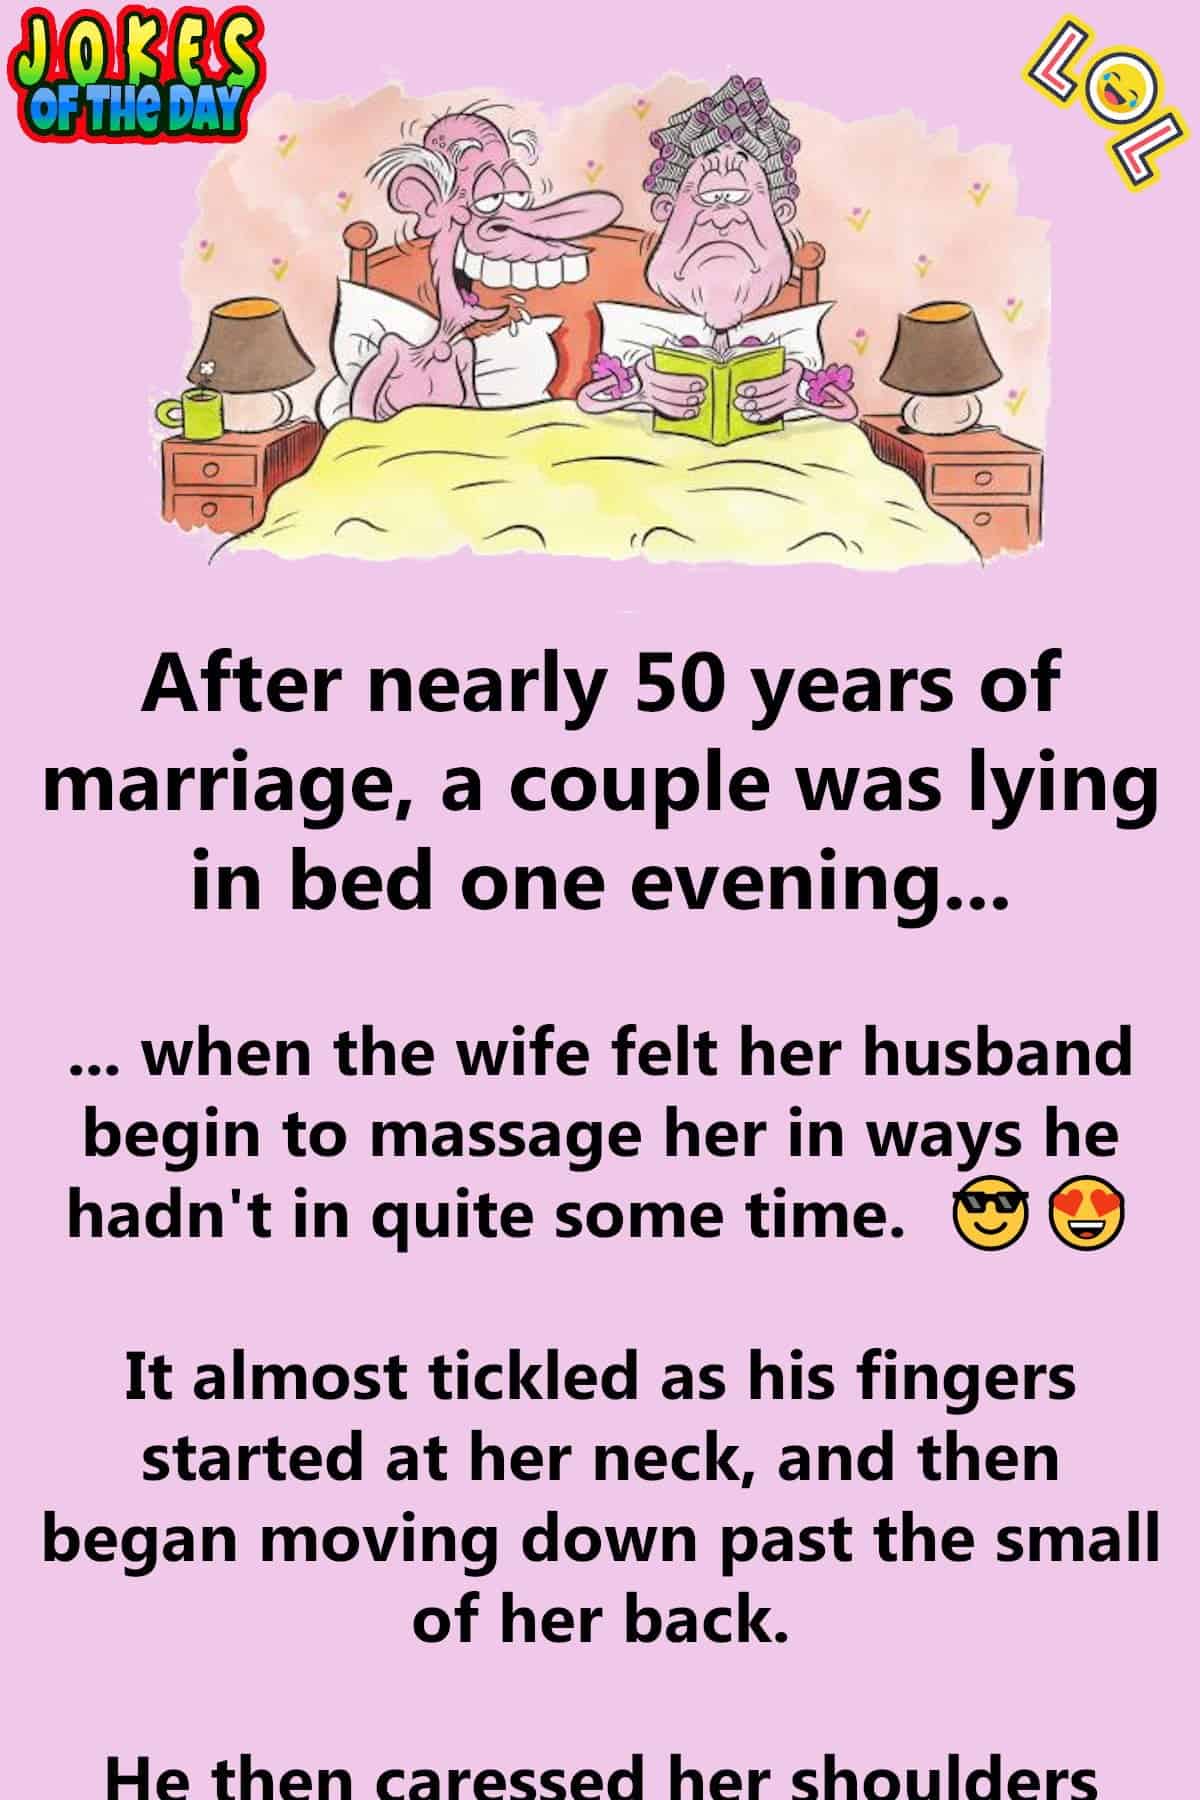 Humor - Things Heat-Up For This Old Couple In Bed